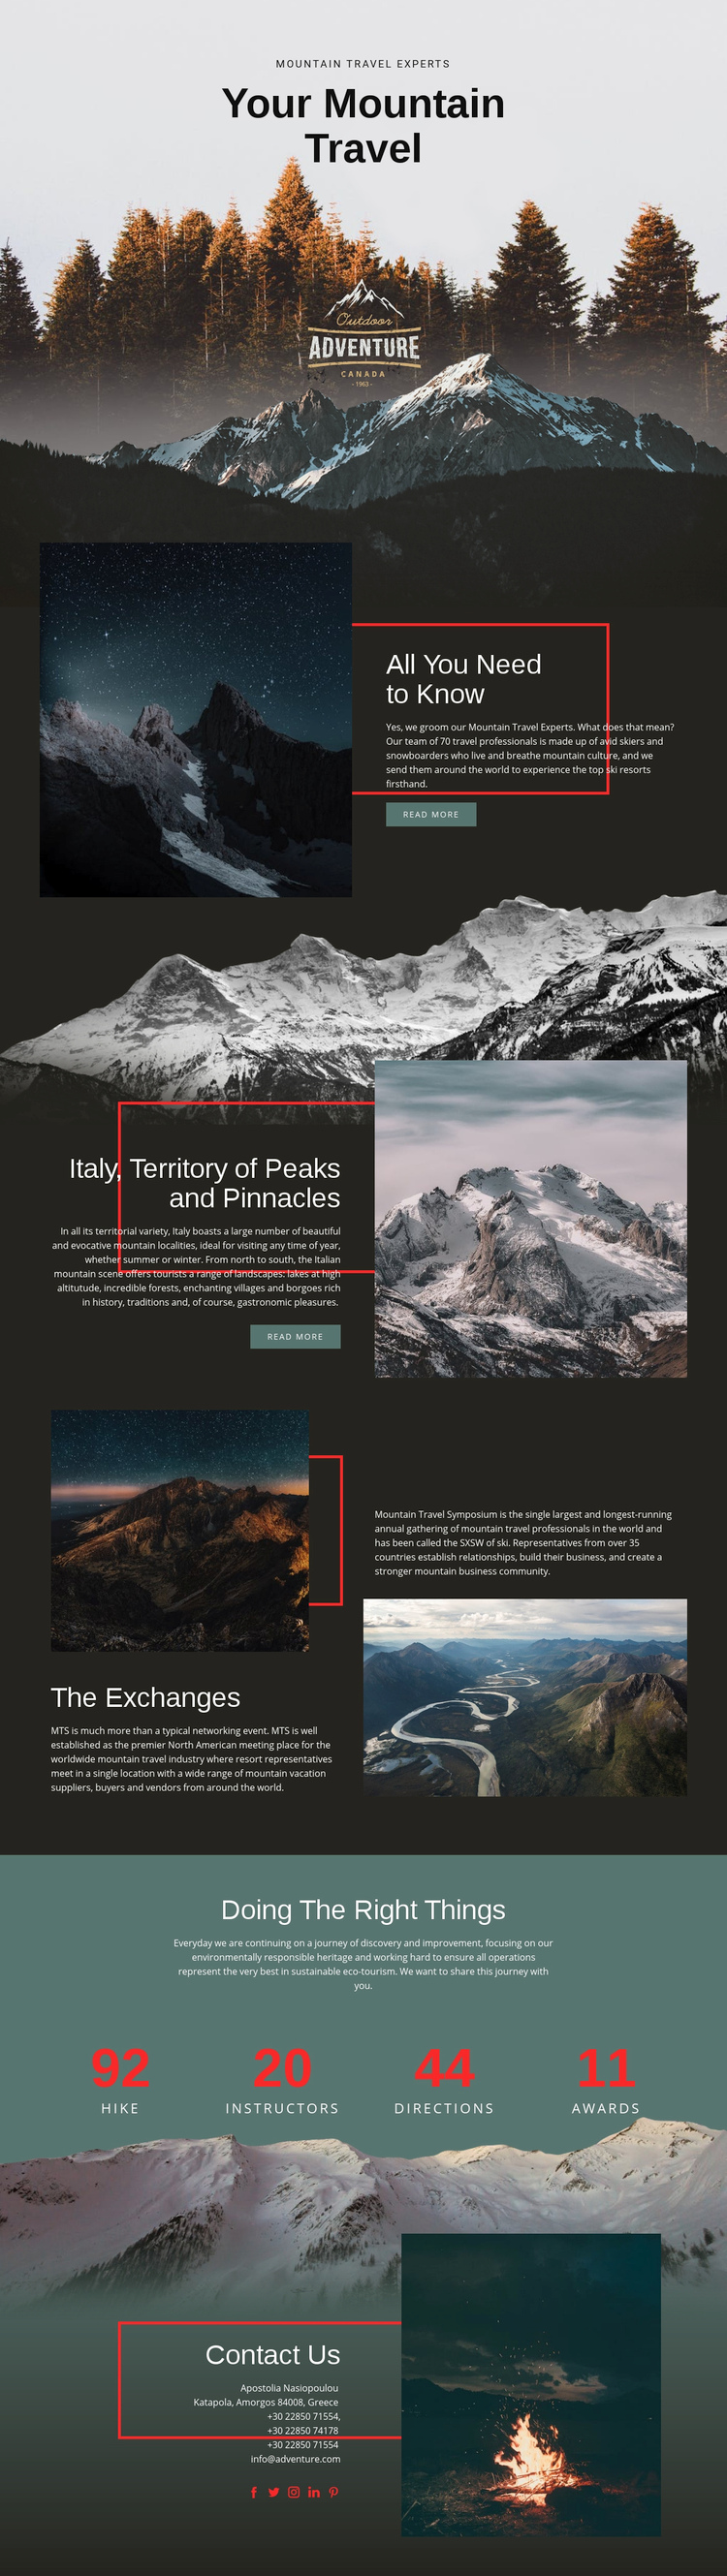 All about mountain travel Squarespace Template Alternative